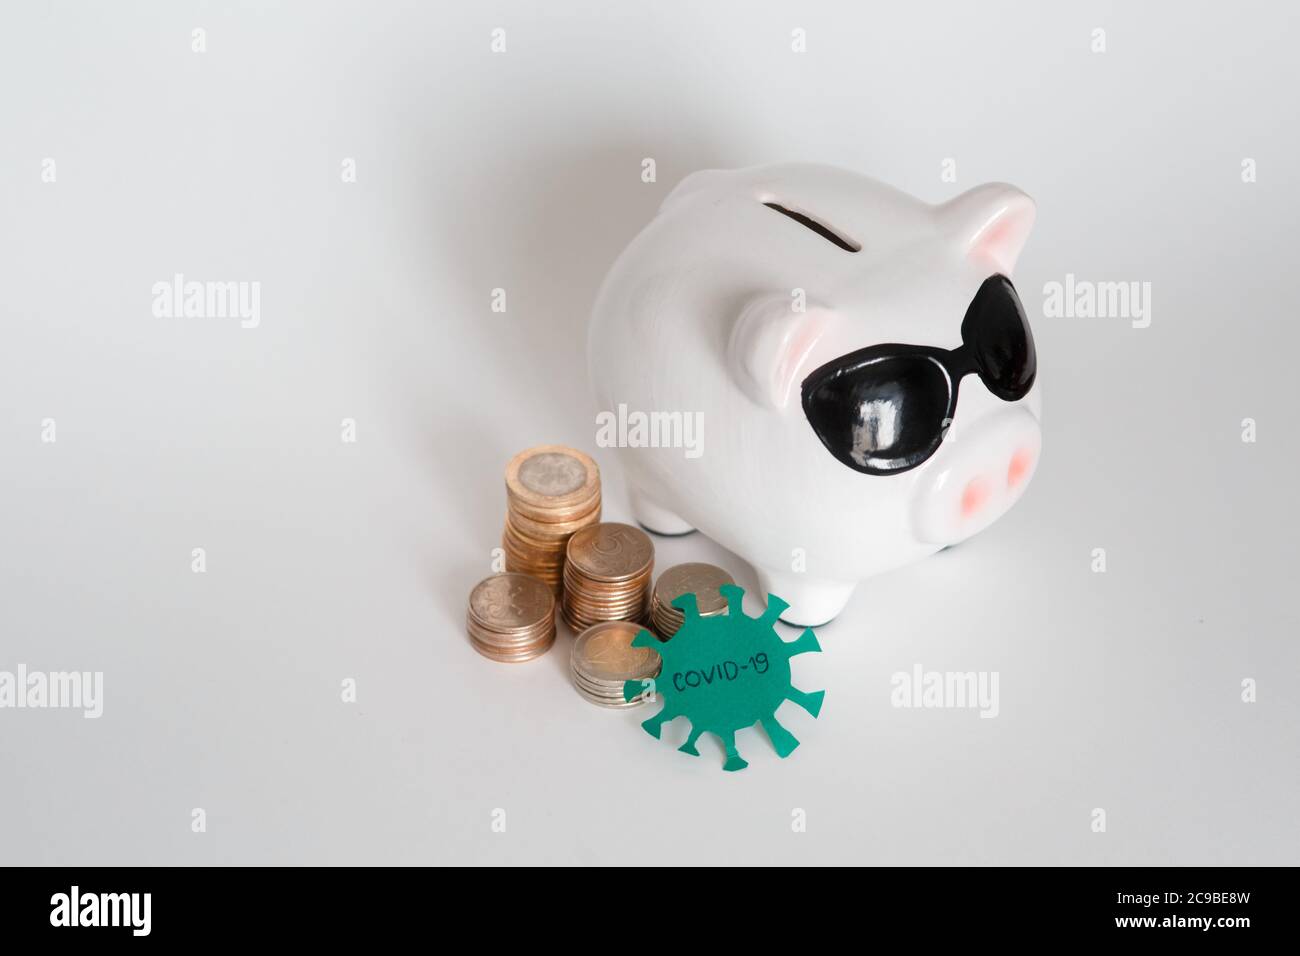 danger to financial savings due to a pandemic virus. piggy bank in a mask on a white background. coins Stock Photo